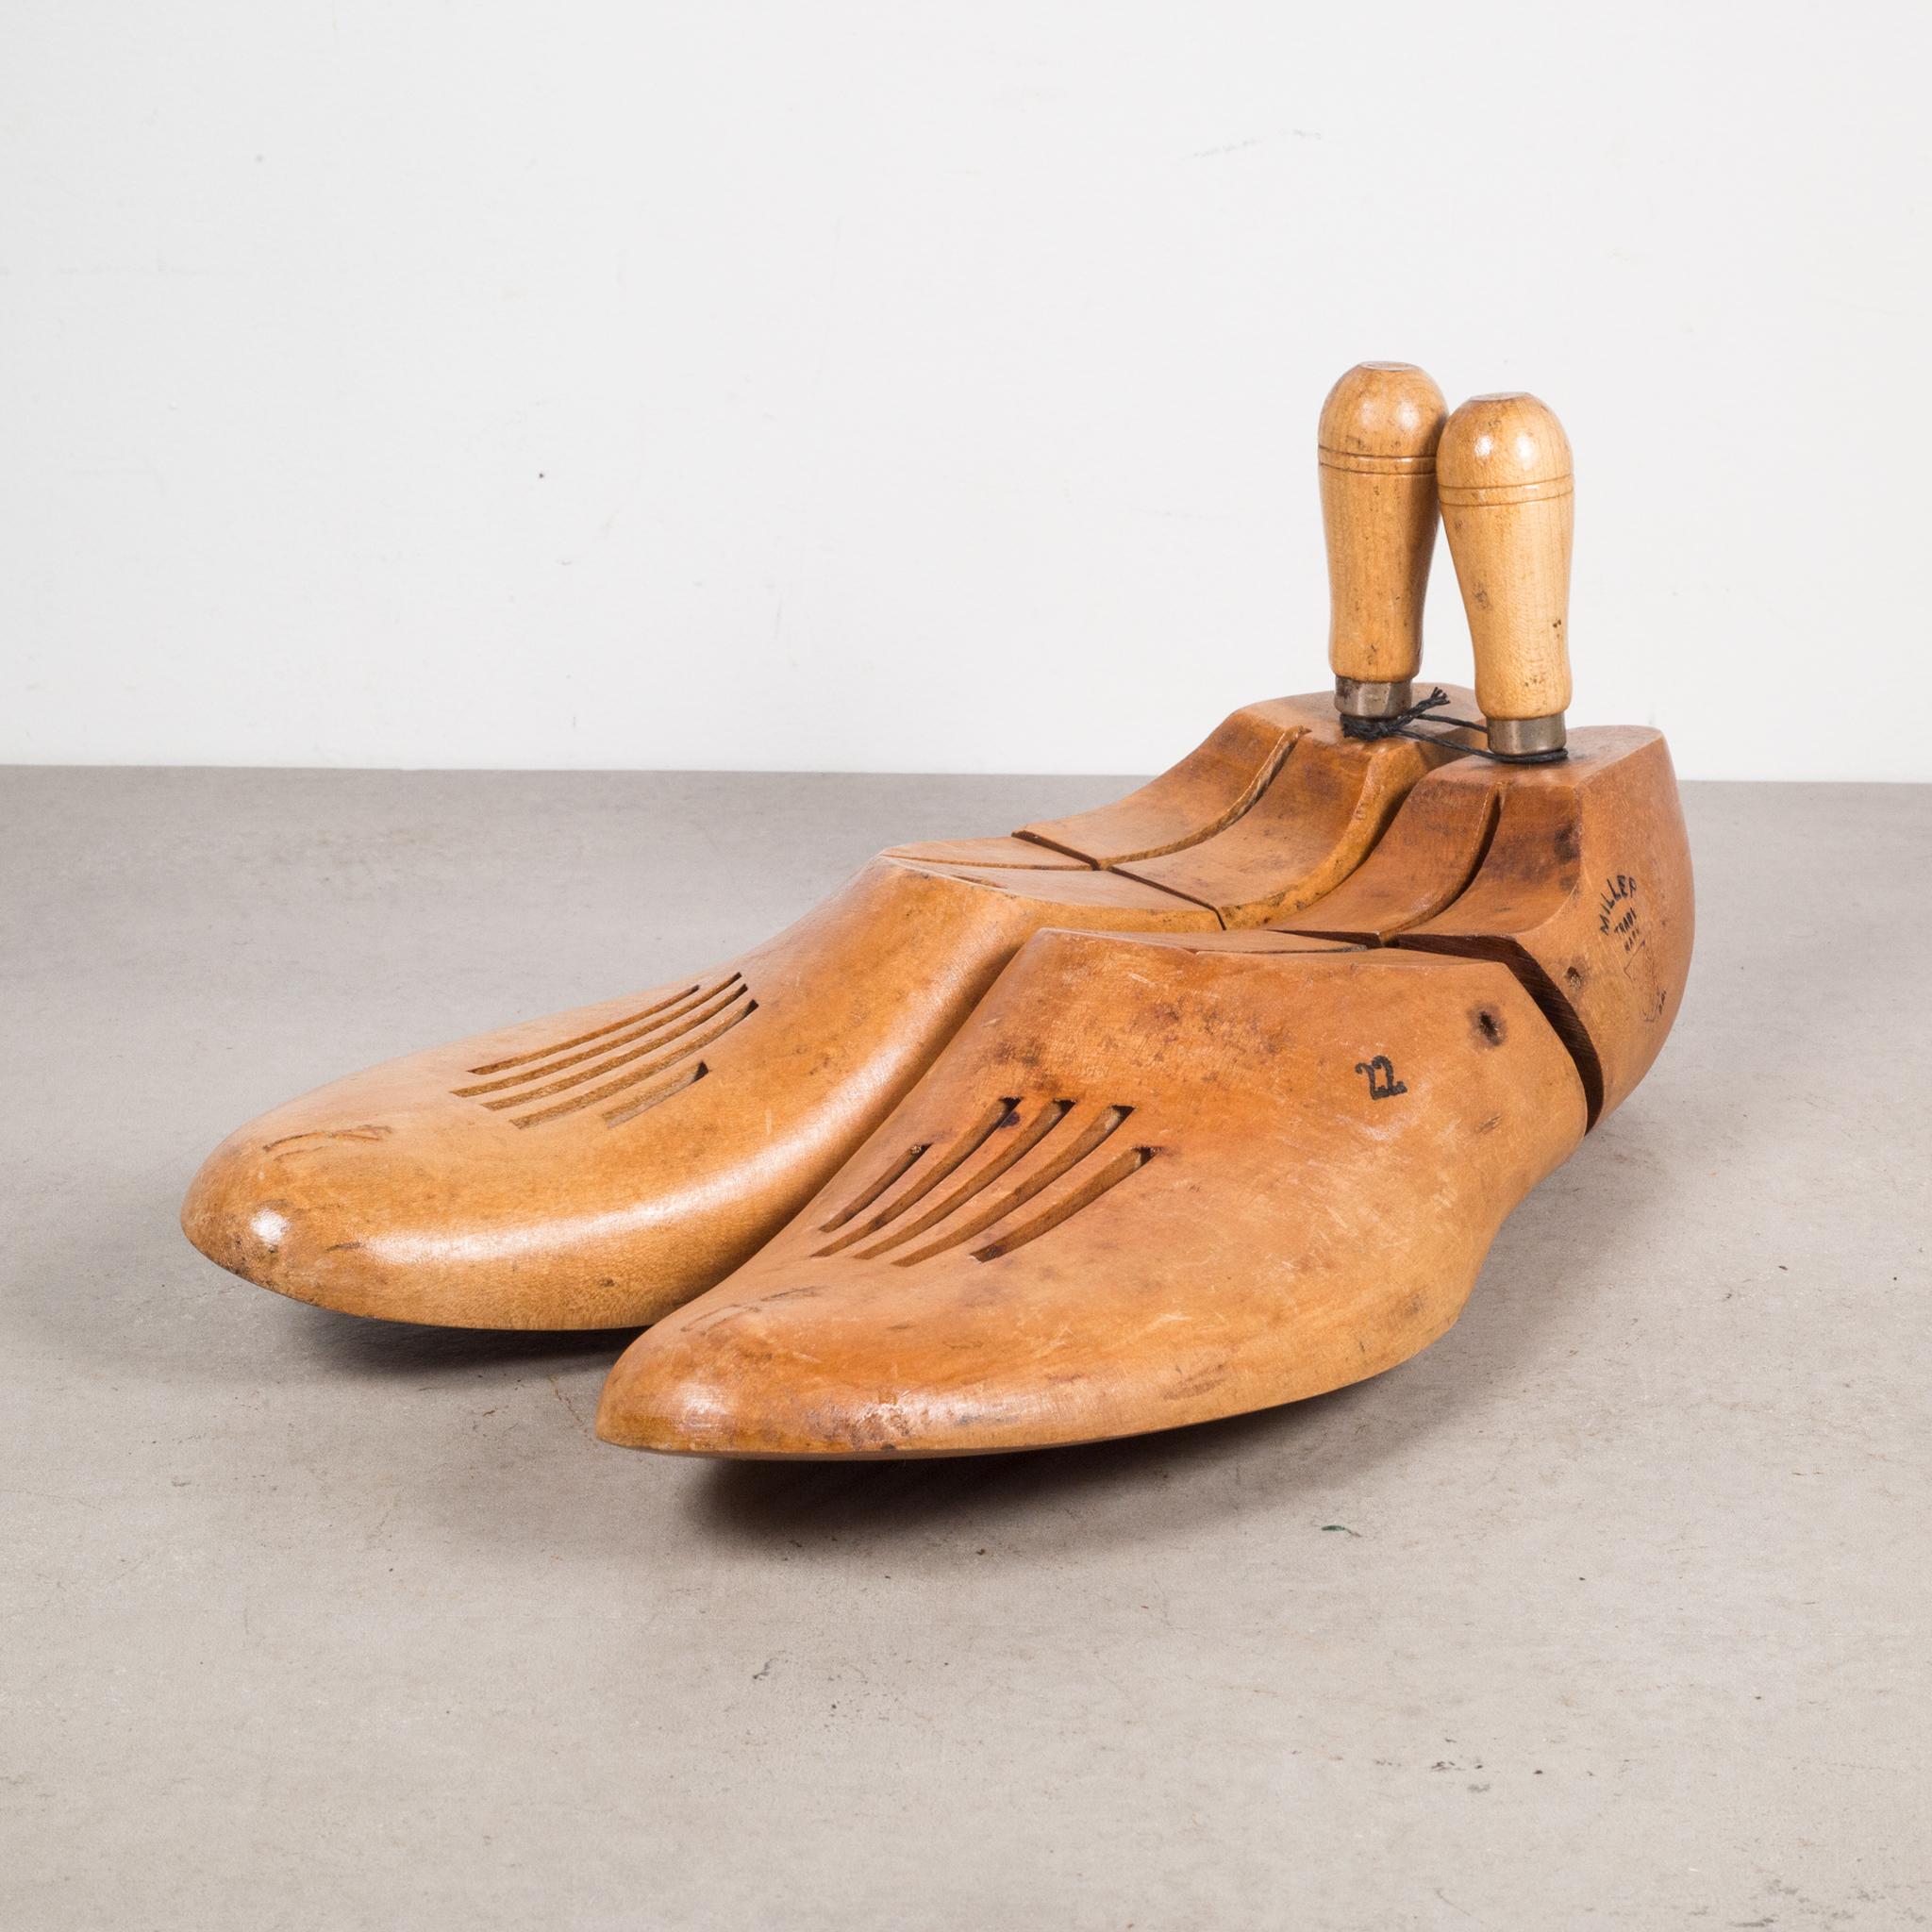 Original pairs of cobbler's wooden shoe forms. They have retained their original finish and have the appropriate wear.

Creator Unknown.
Date of manufacture c.1920
Materials and techniques maple or beech.
Condition good. Wear consistent with